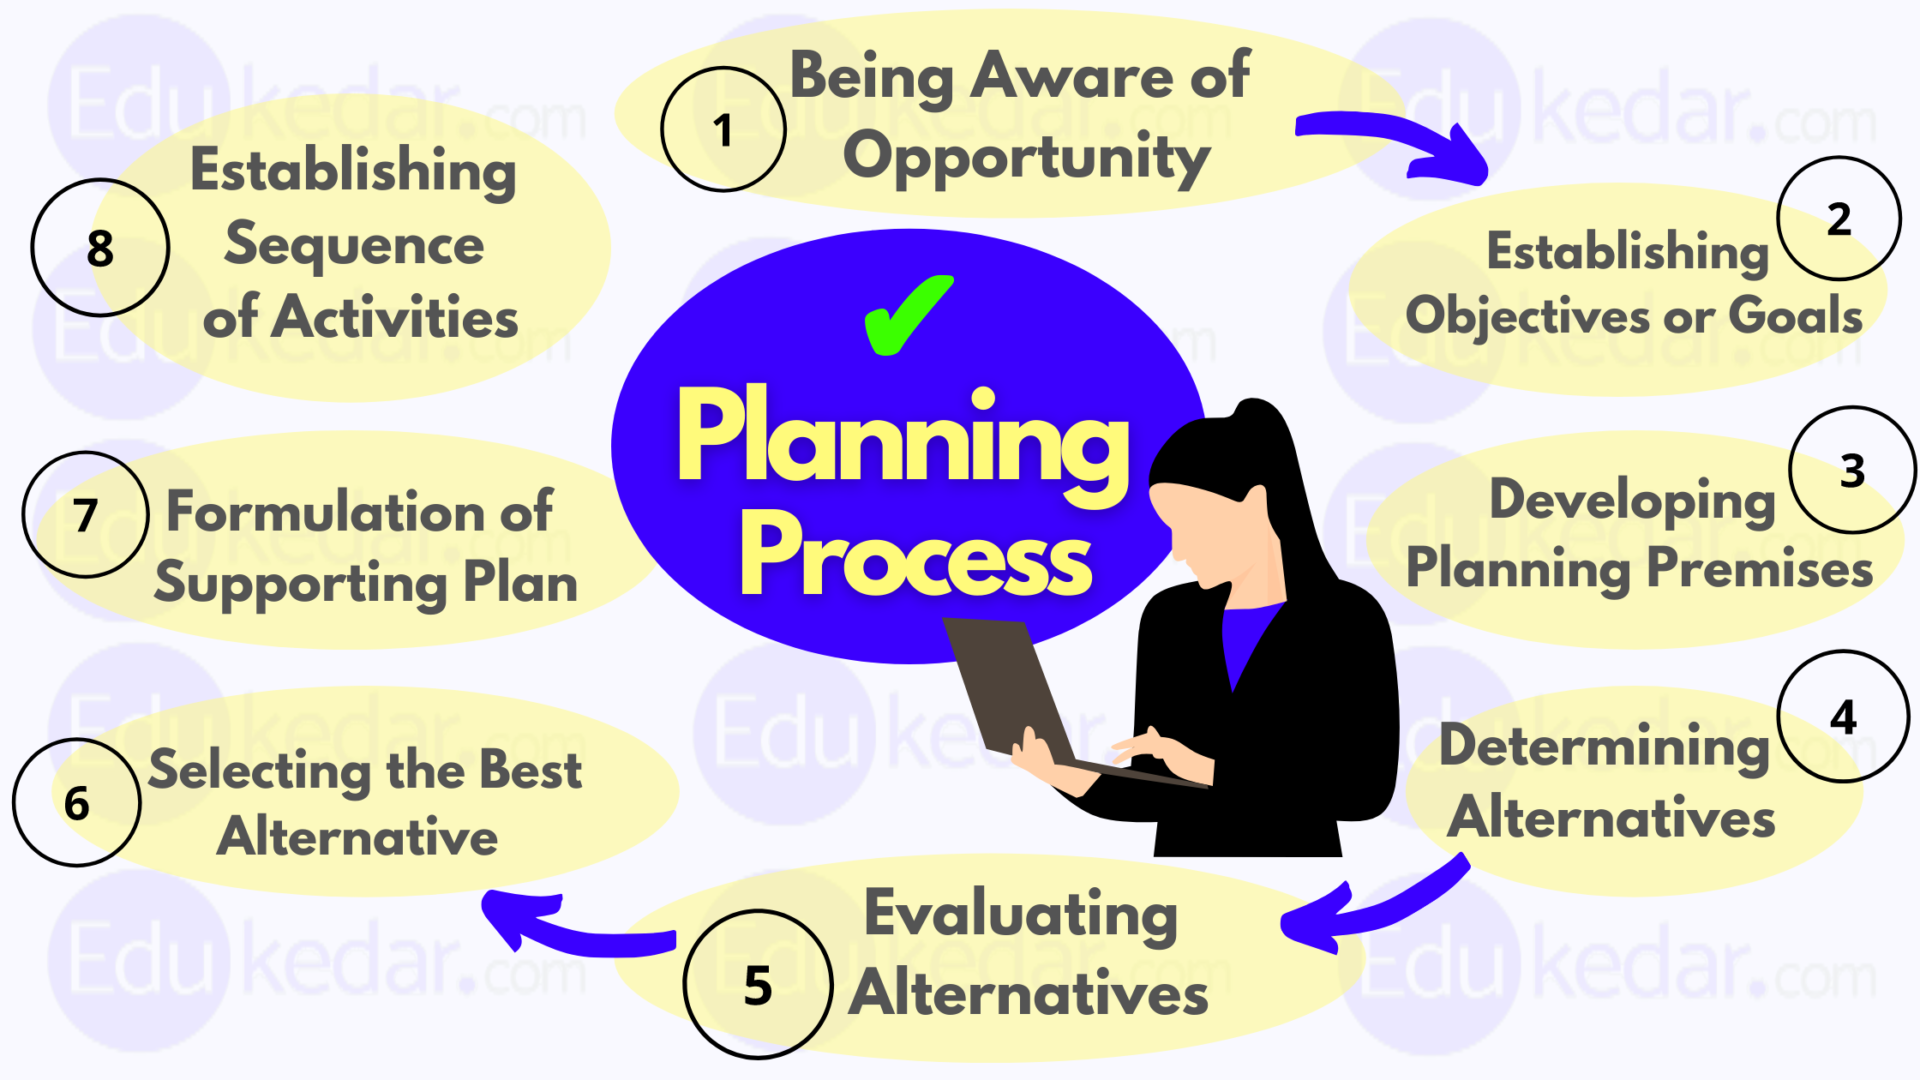 the business planning process involves